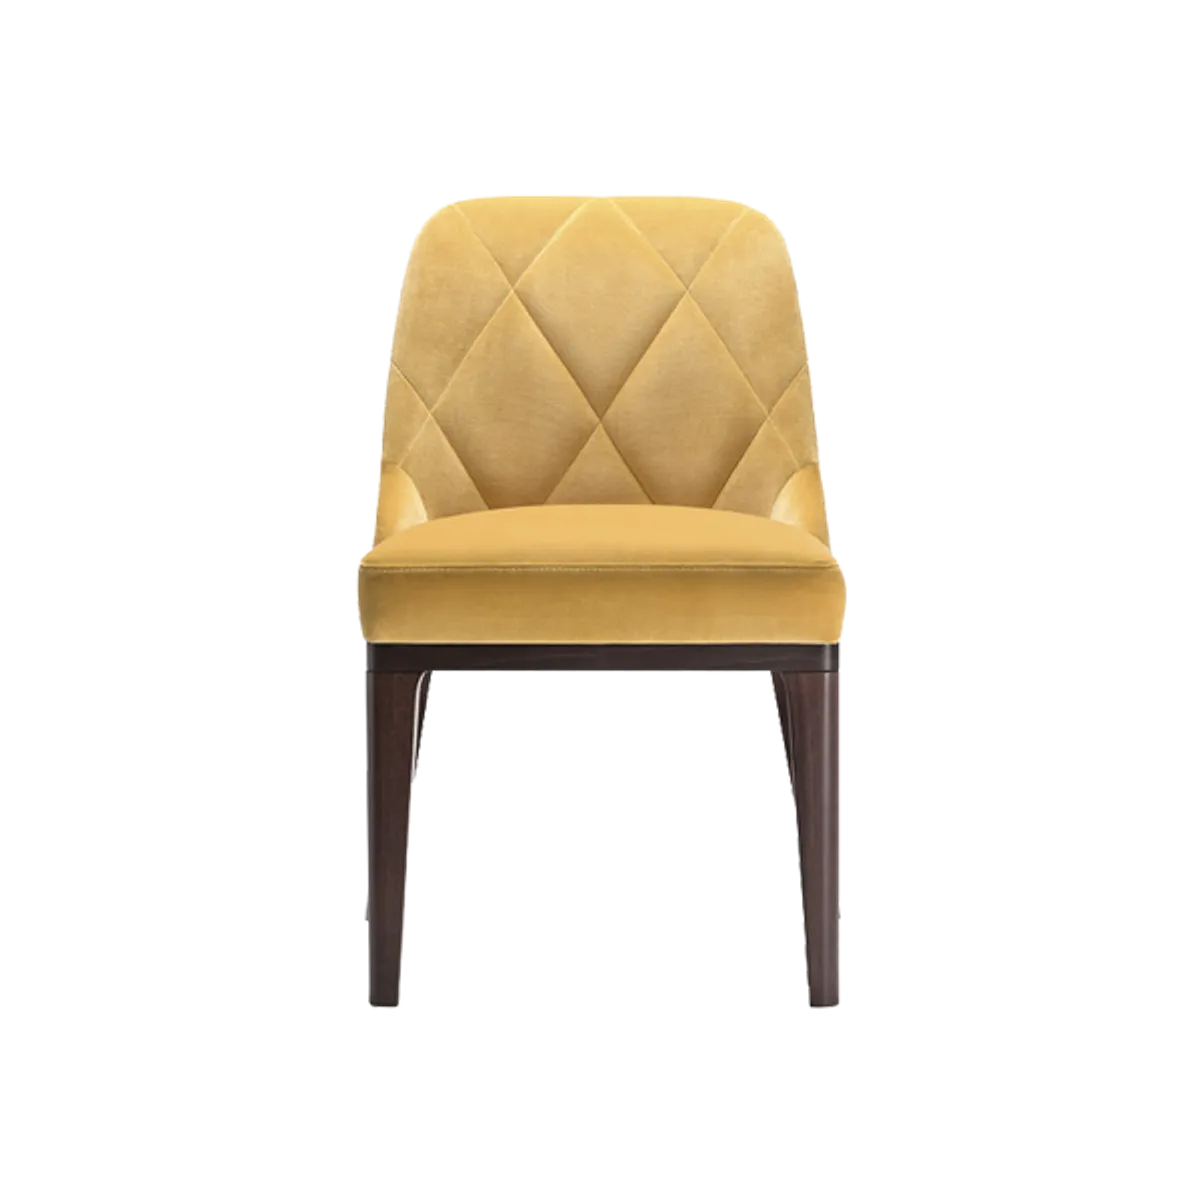 Web Dodie Side Chair Yellow Quilted Upholstery Insideoutcontracts